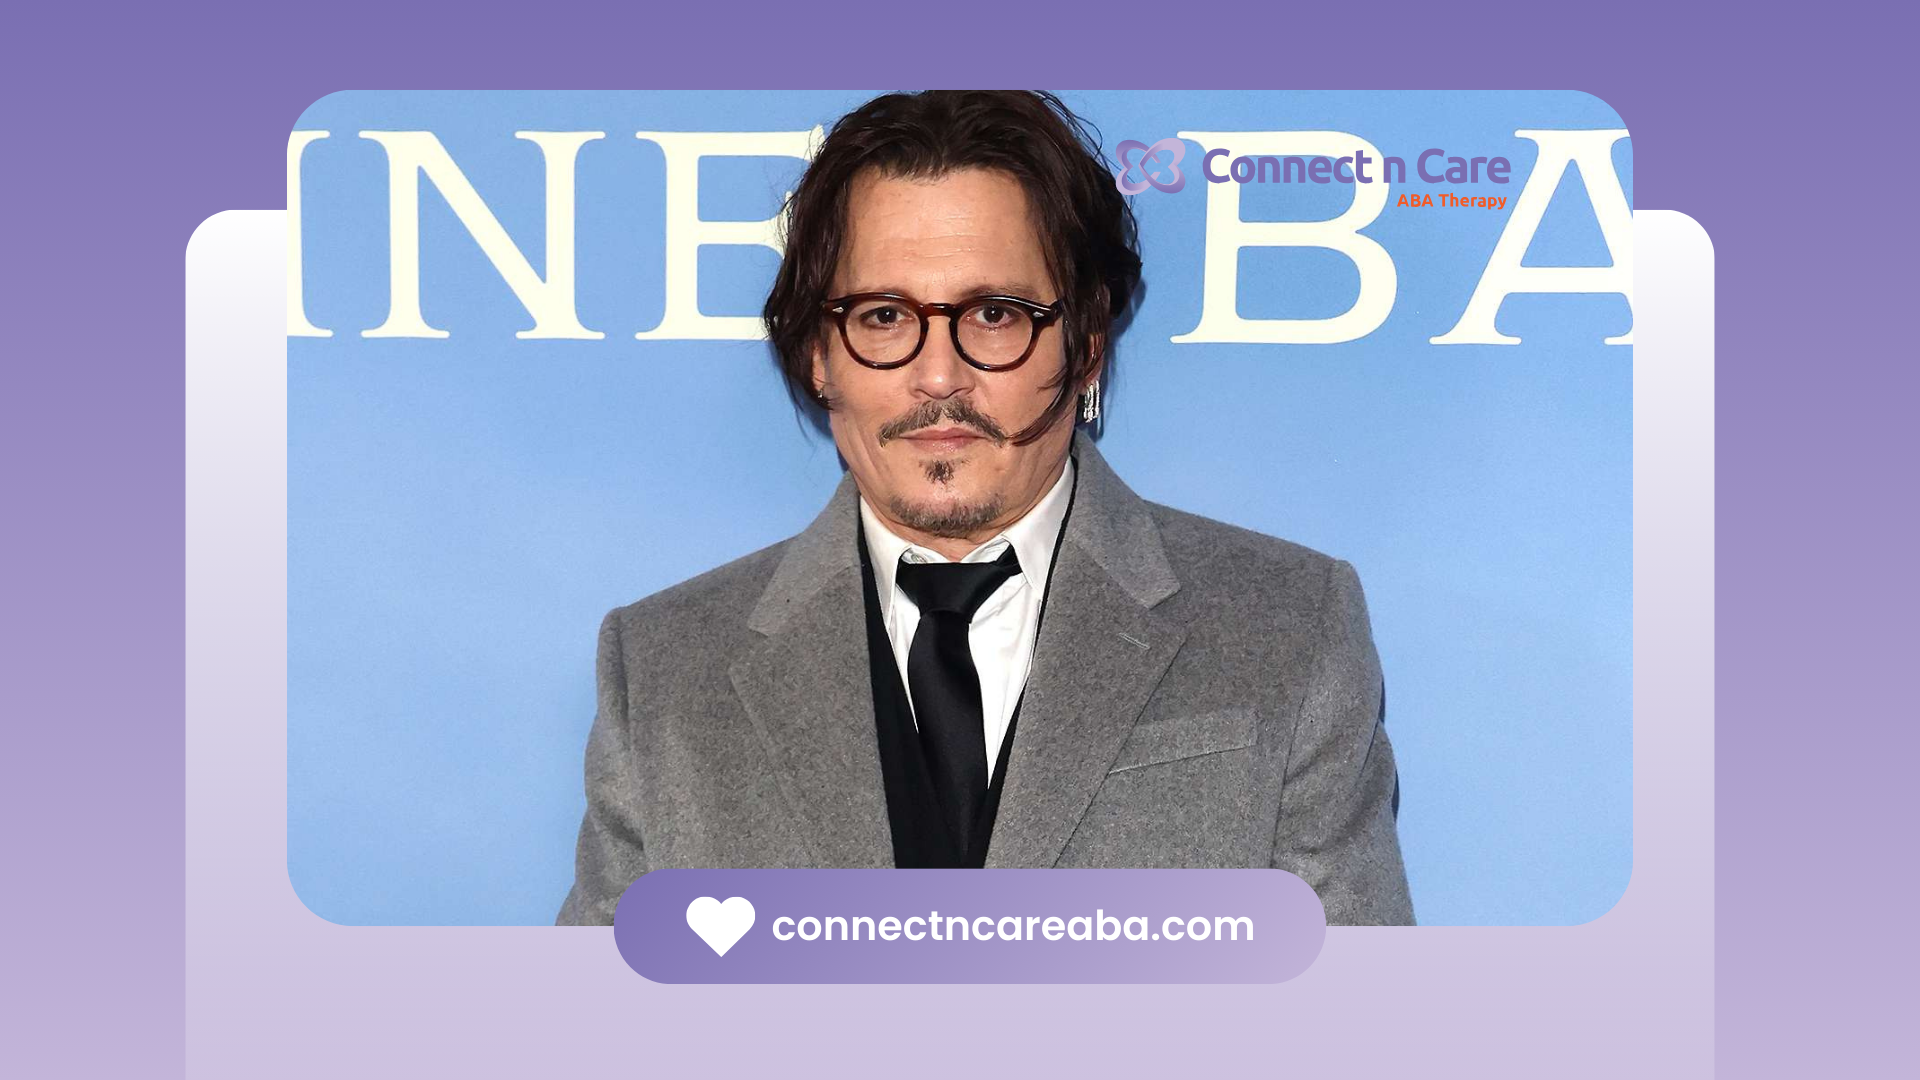 Johnny Depp, a globally-known actor, speculated w/ autism, posing in a gray suit at an event.